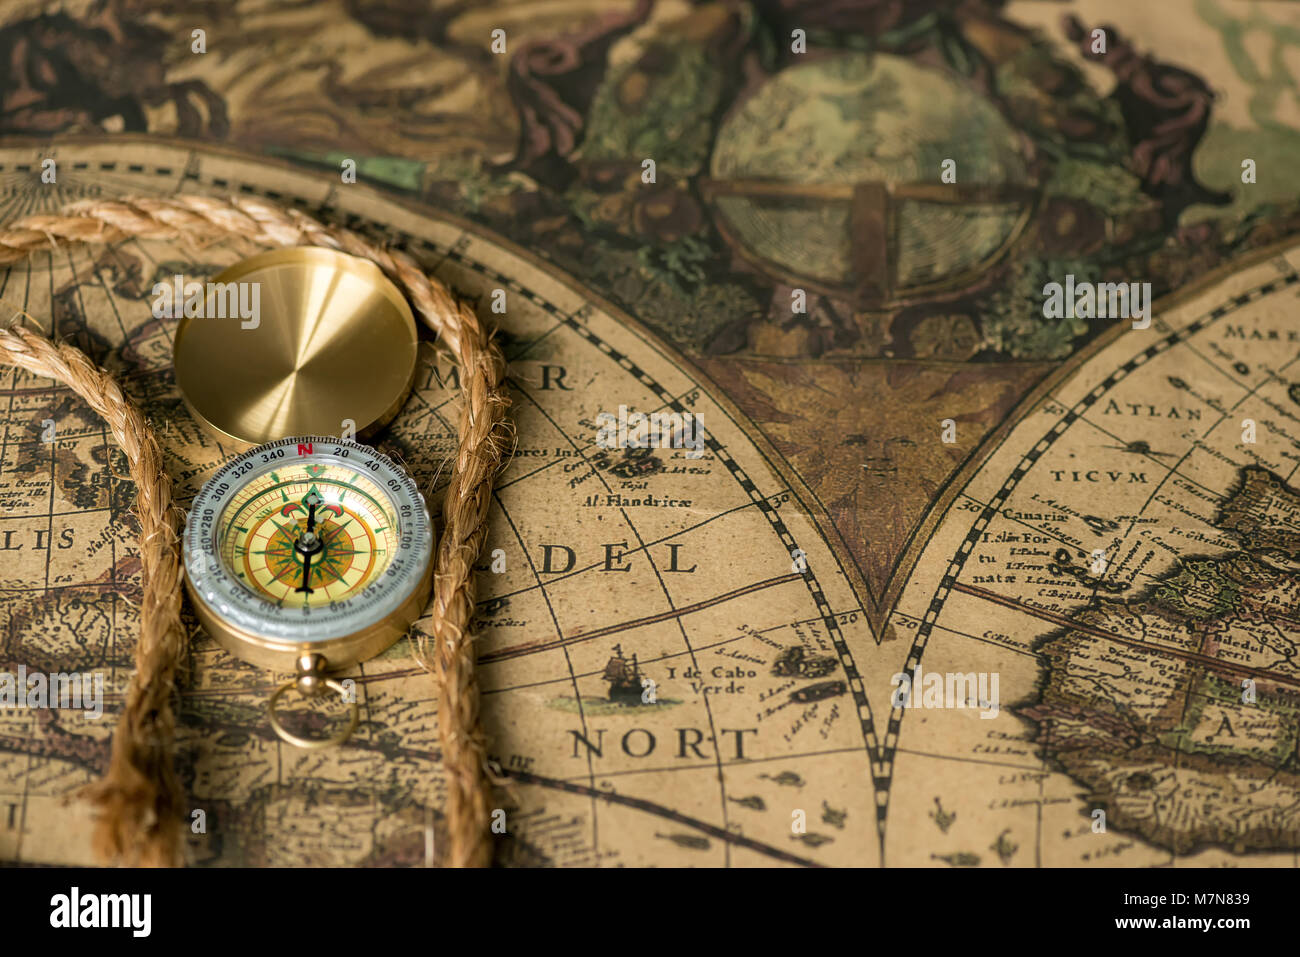 Old compass on vintage map with rope closeup. Retro stale Stock Photo